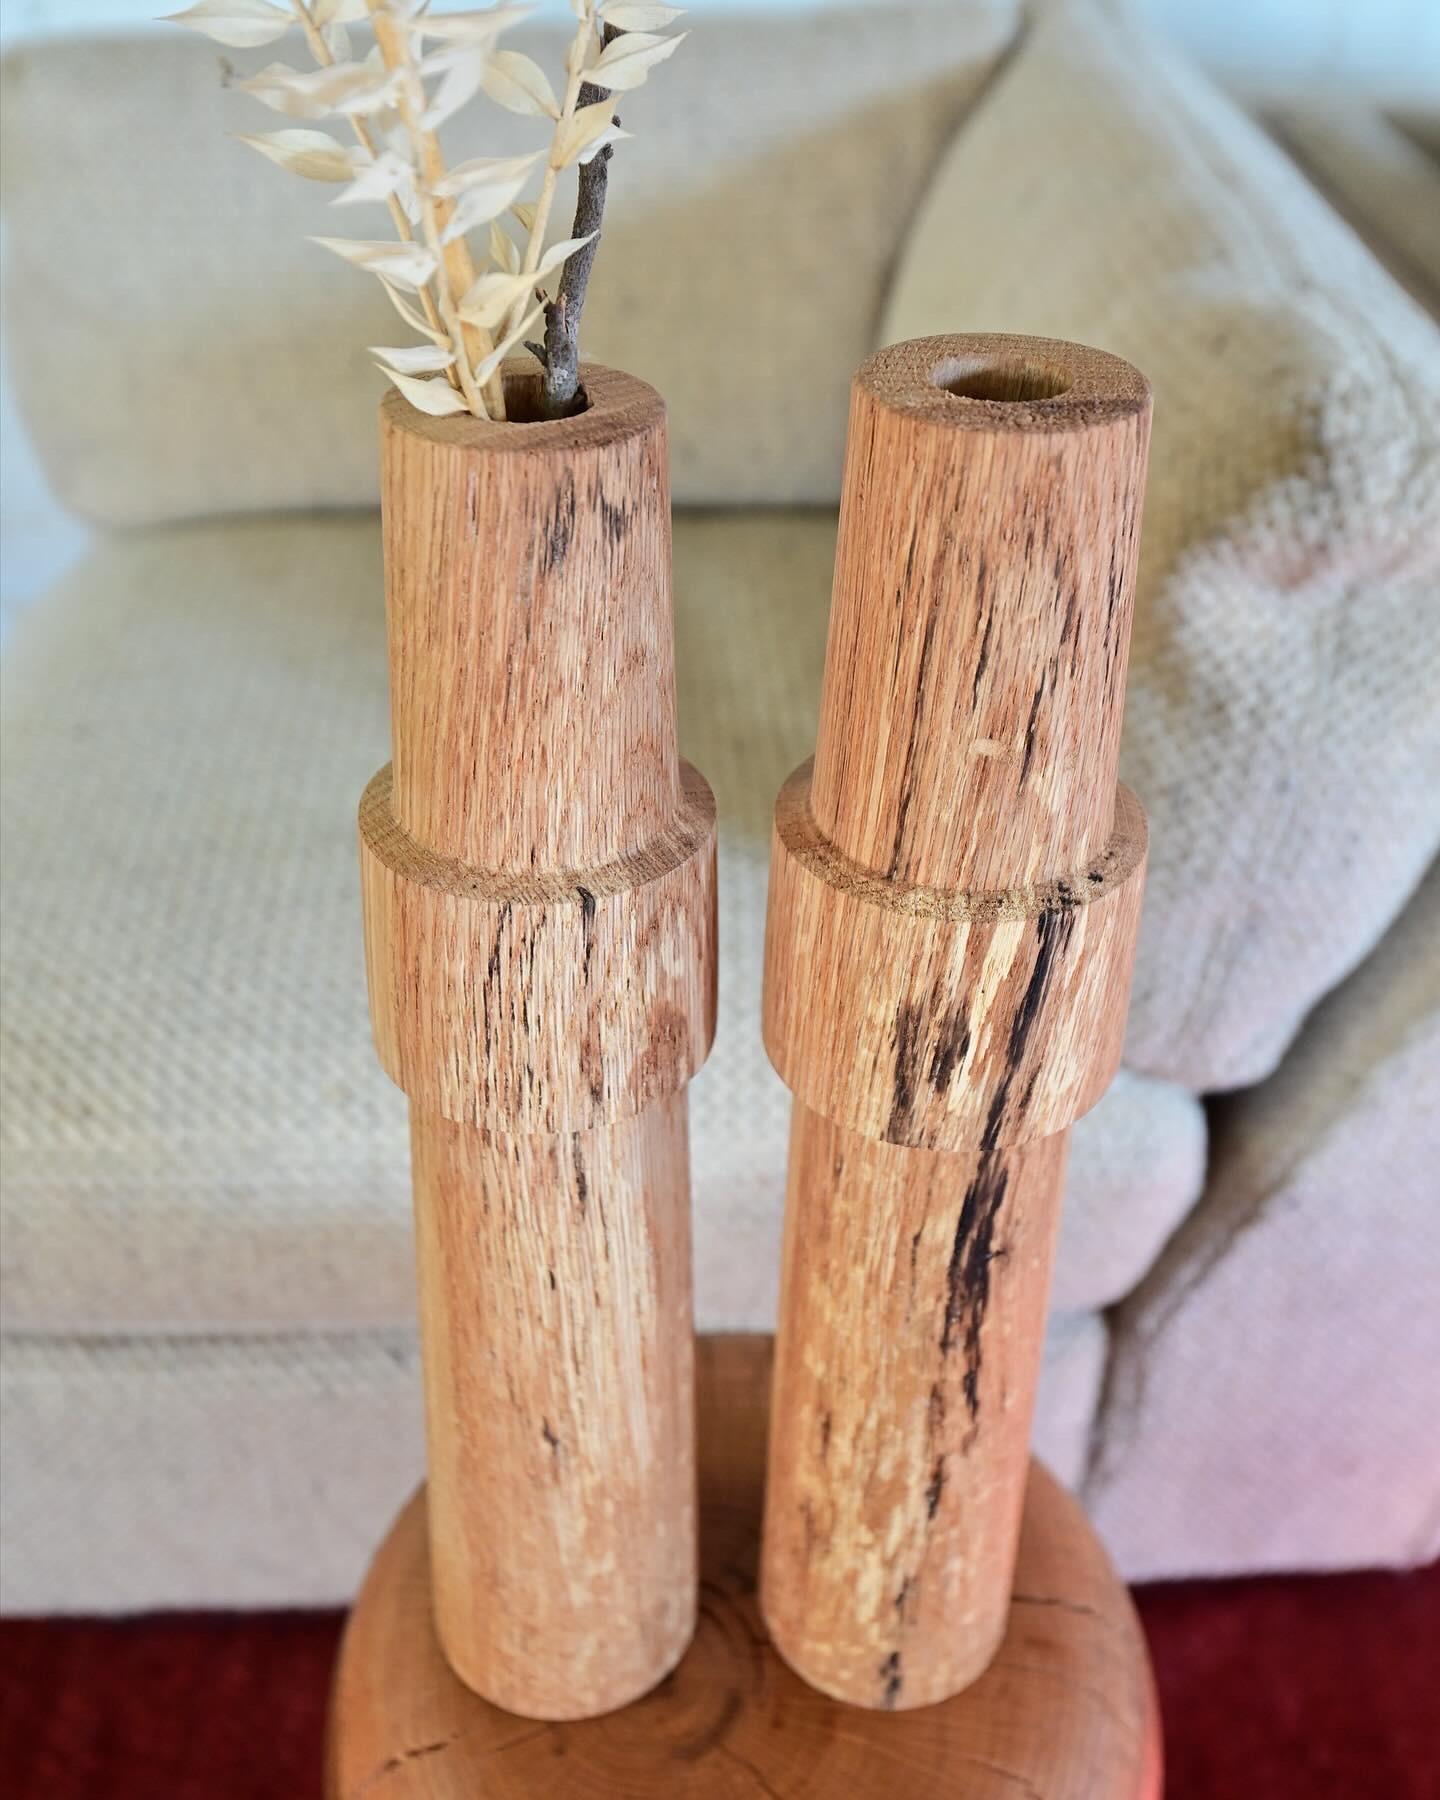 Pair of matching oak vases with 1